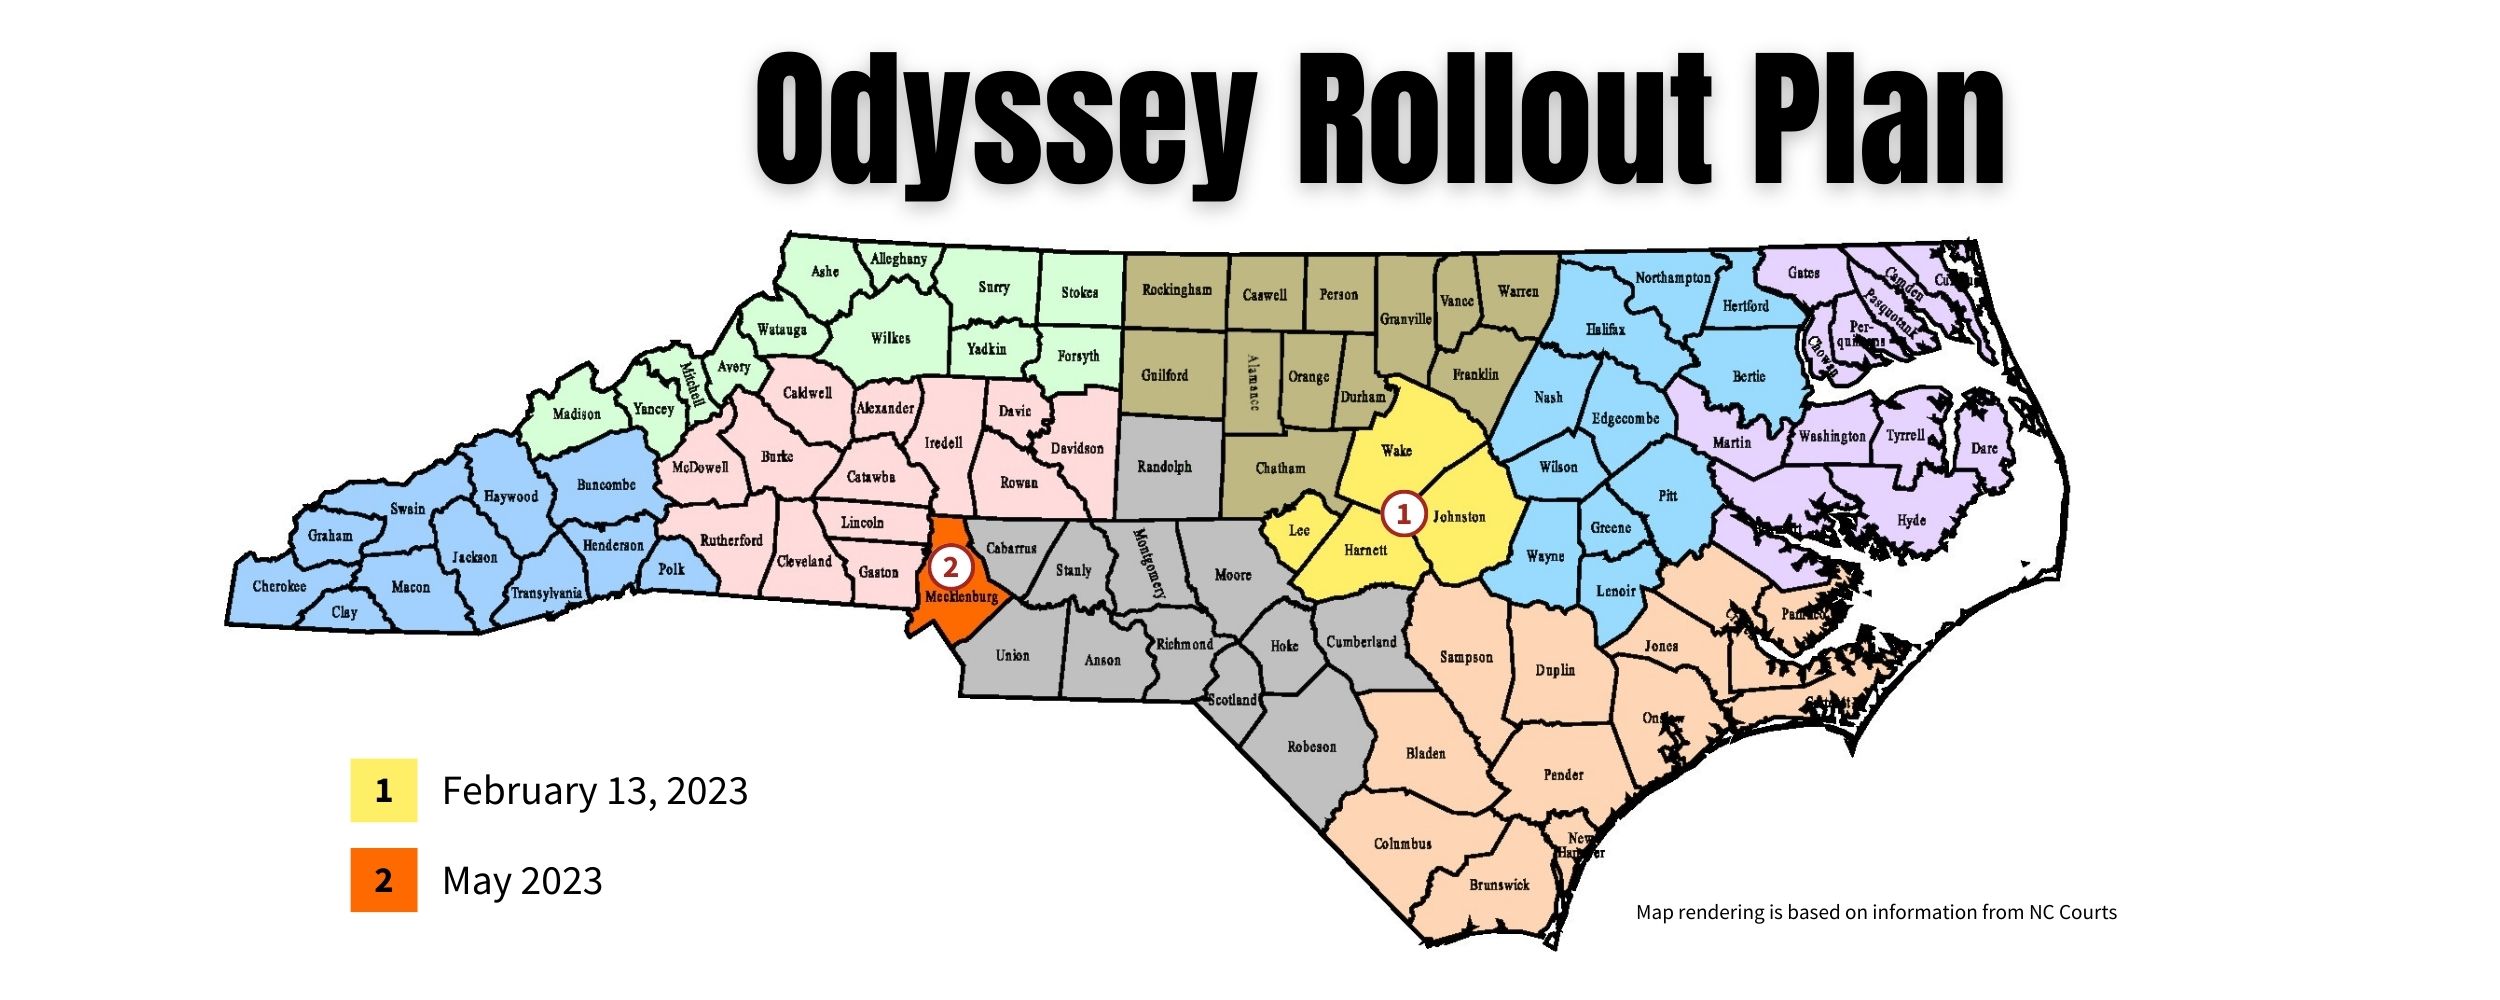 Odessy Rollout Plan Map